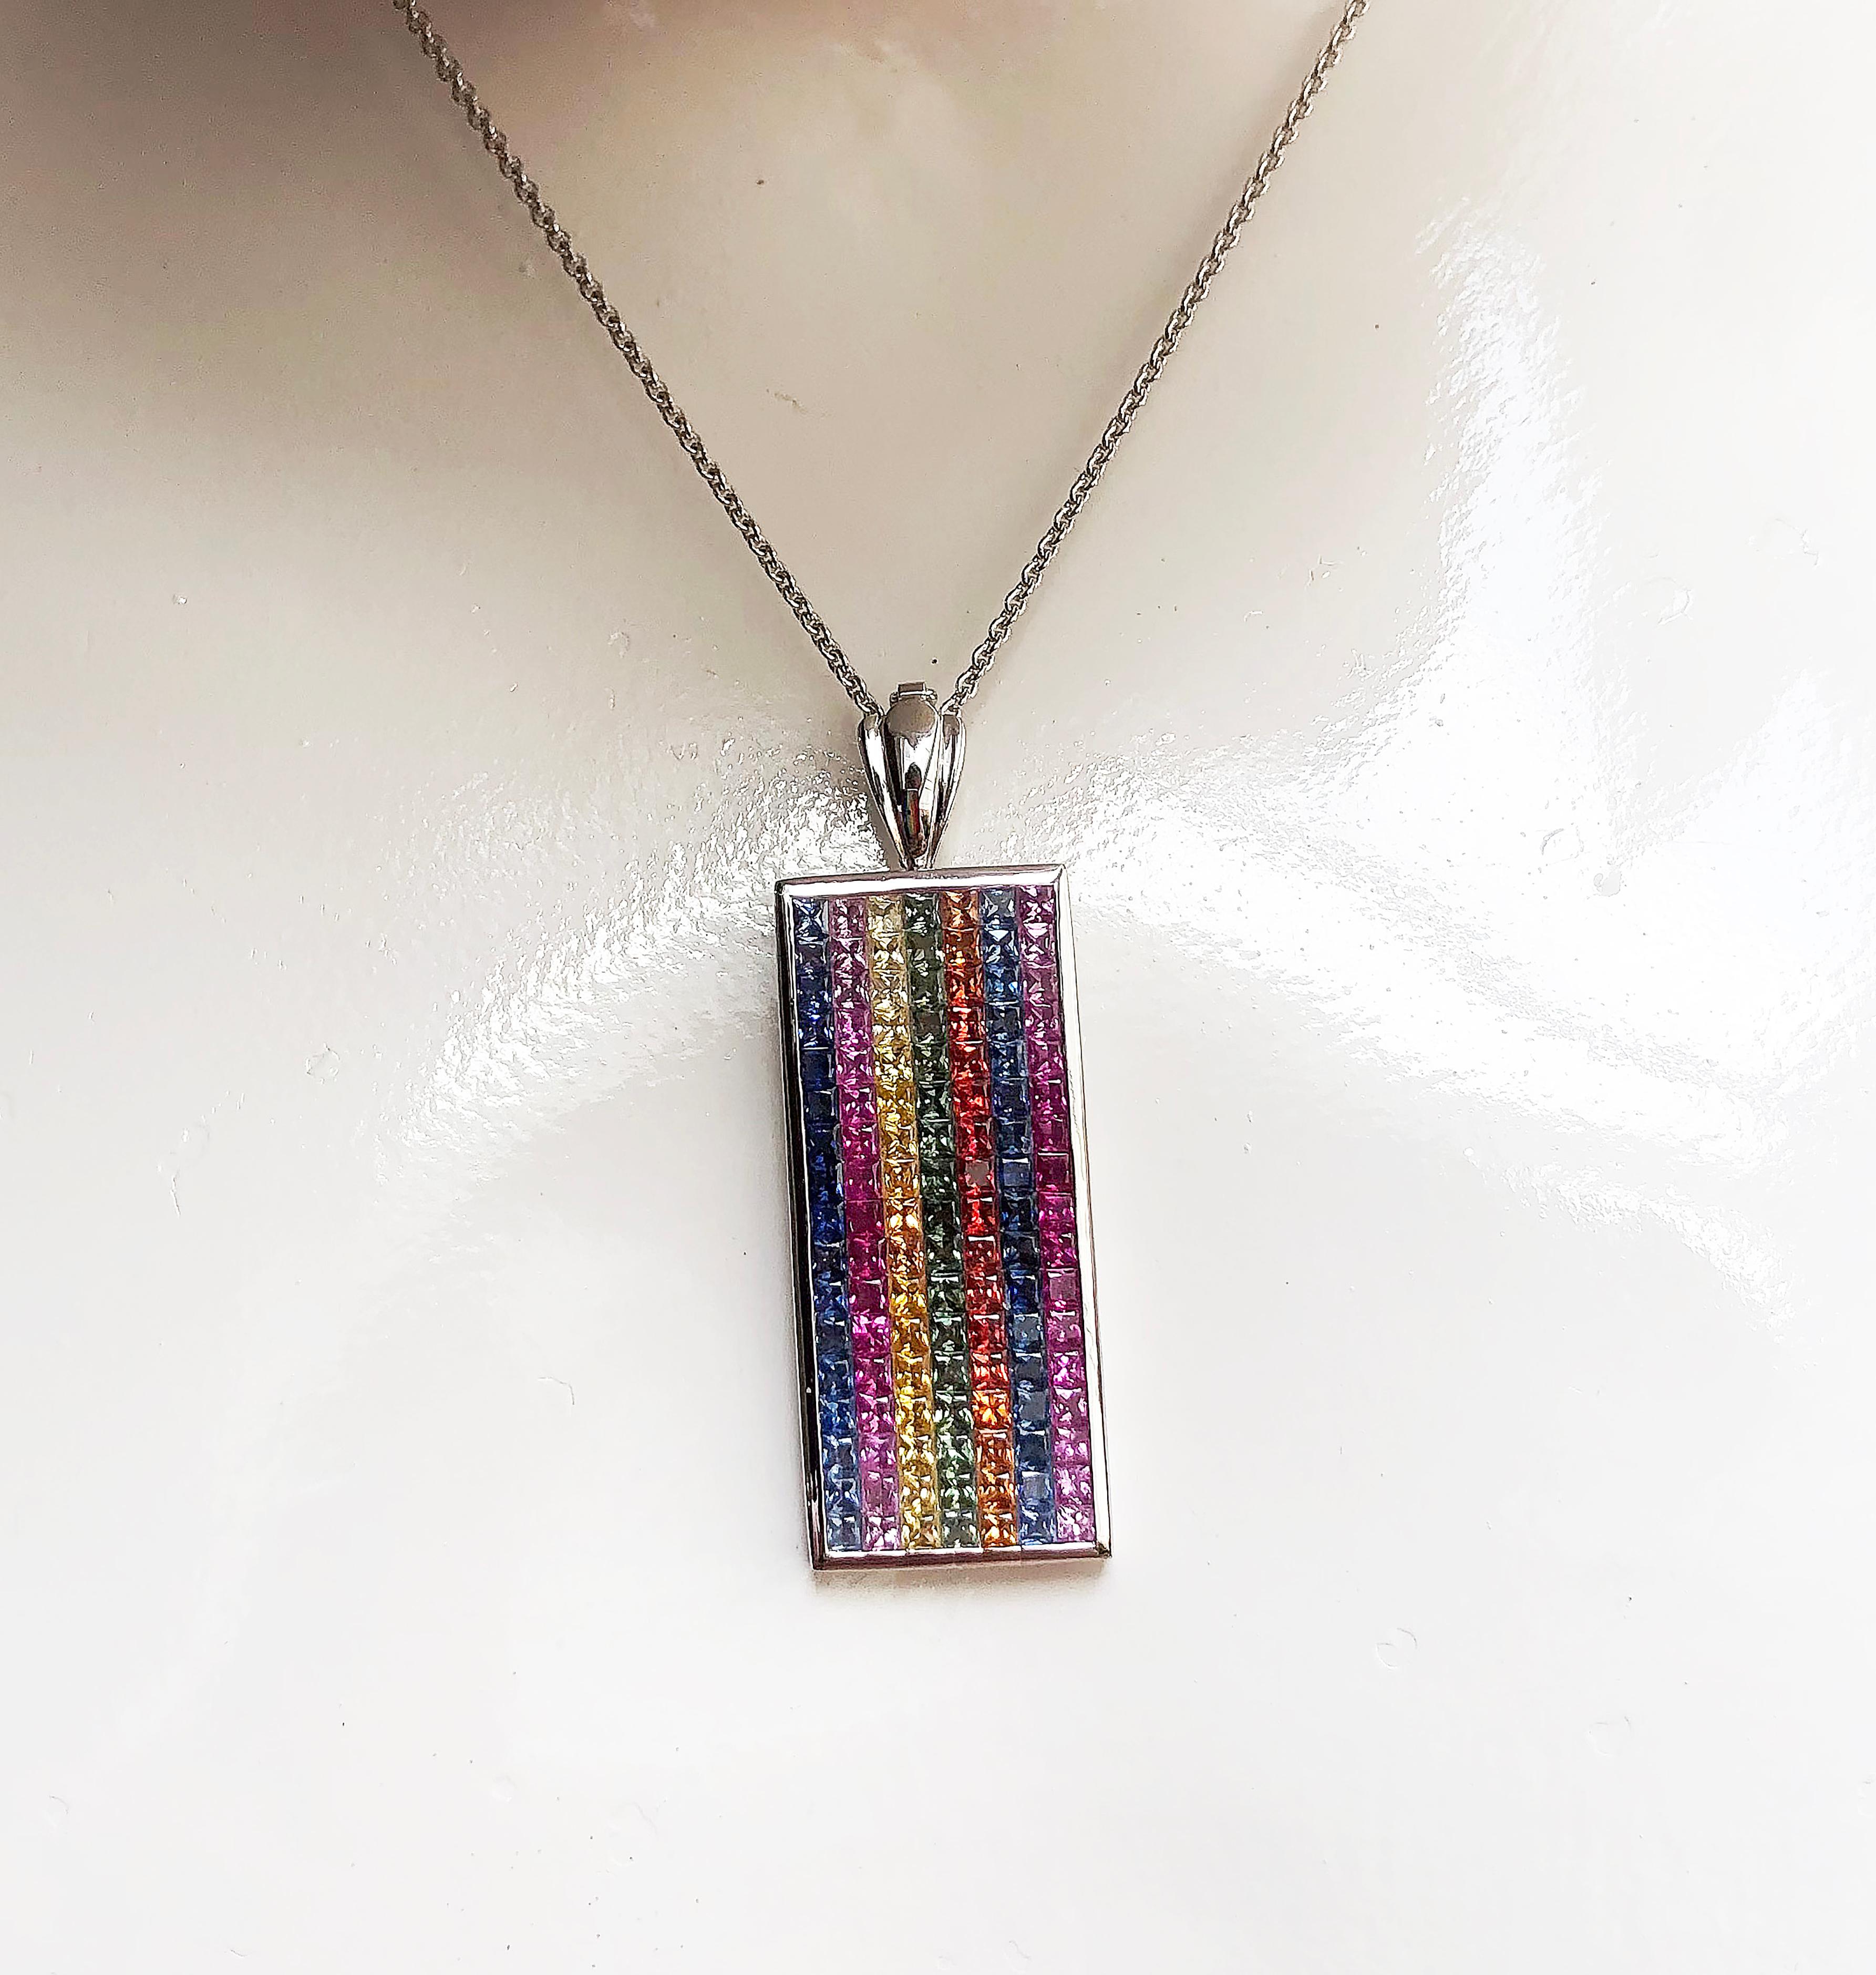 Rainbow Colour Sapphire 9.52 carats Pendant set in 18 Karat White Gold Settings
(chain not included)

Width: 1.7 cm
Length: 4.9 cm 

